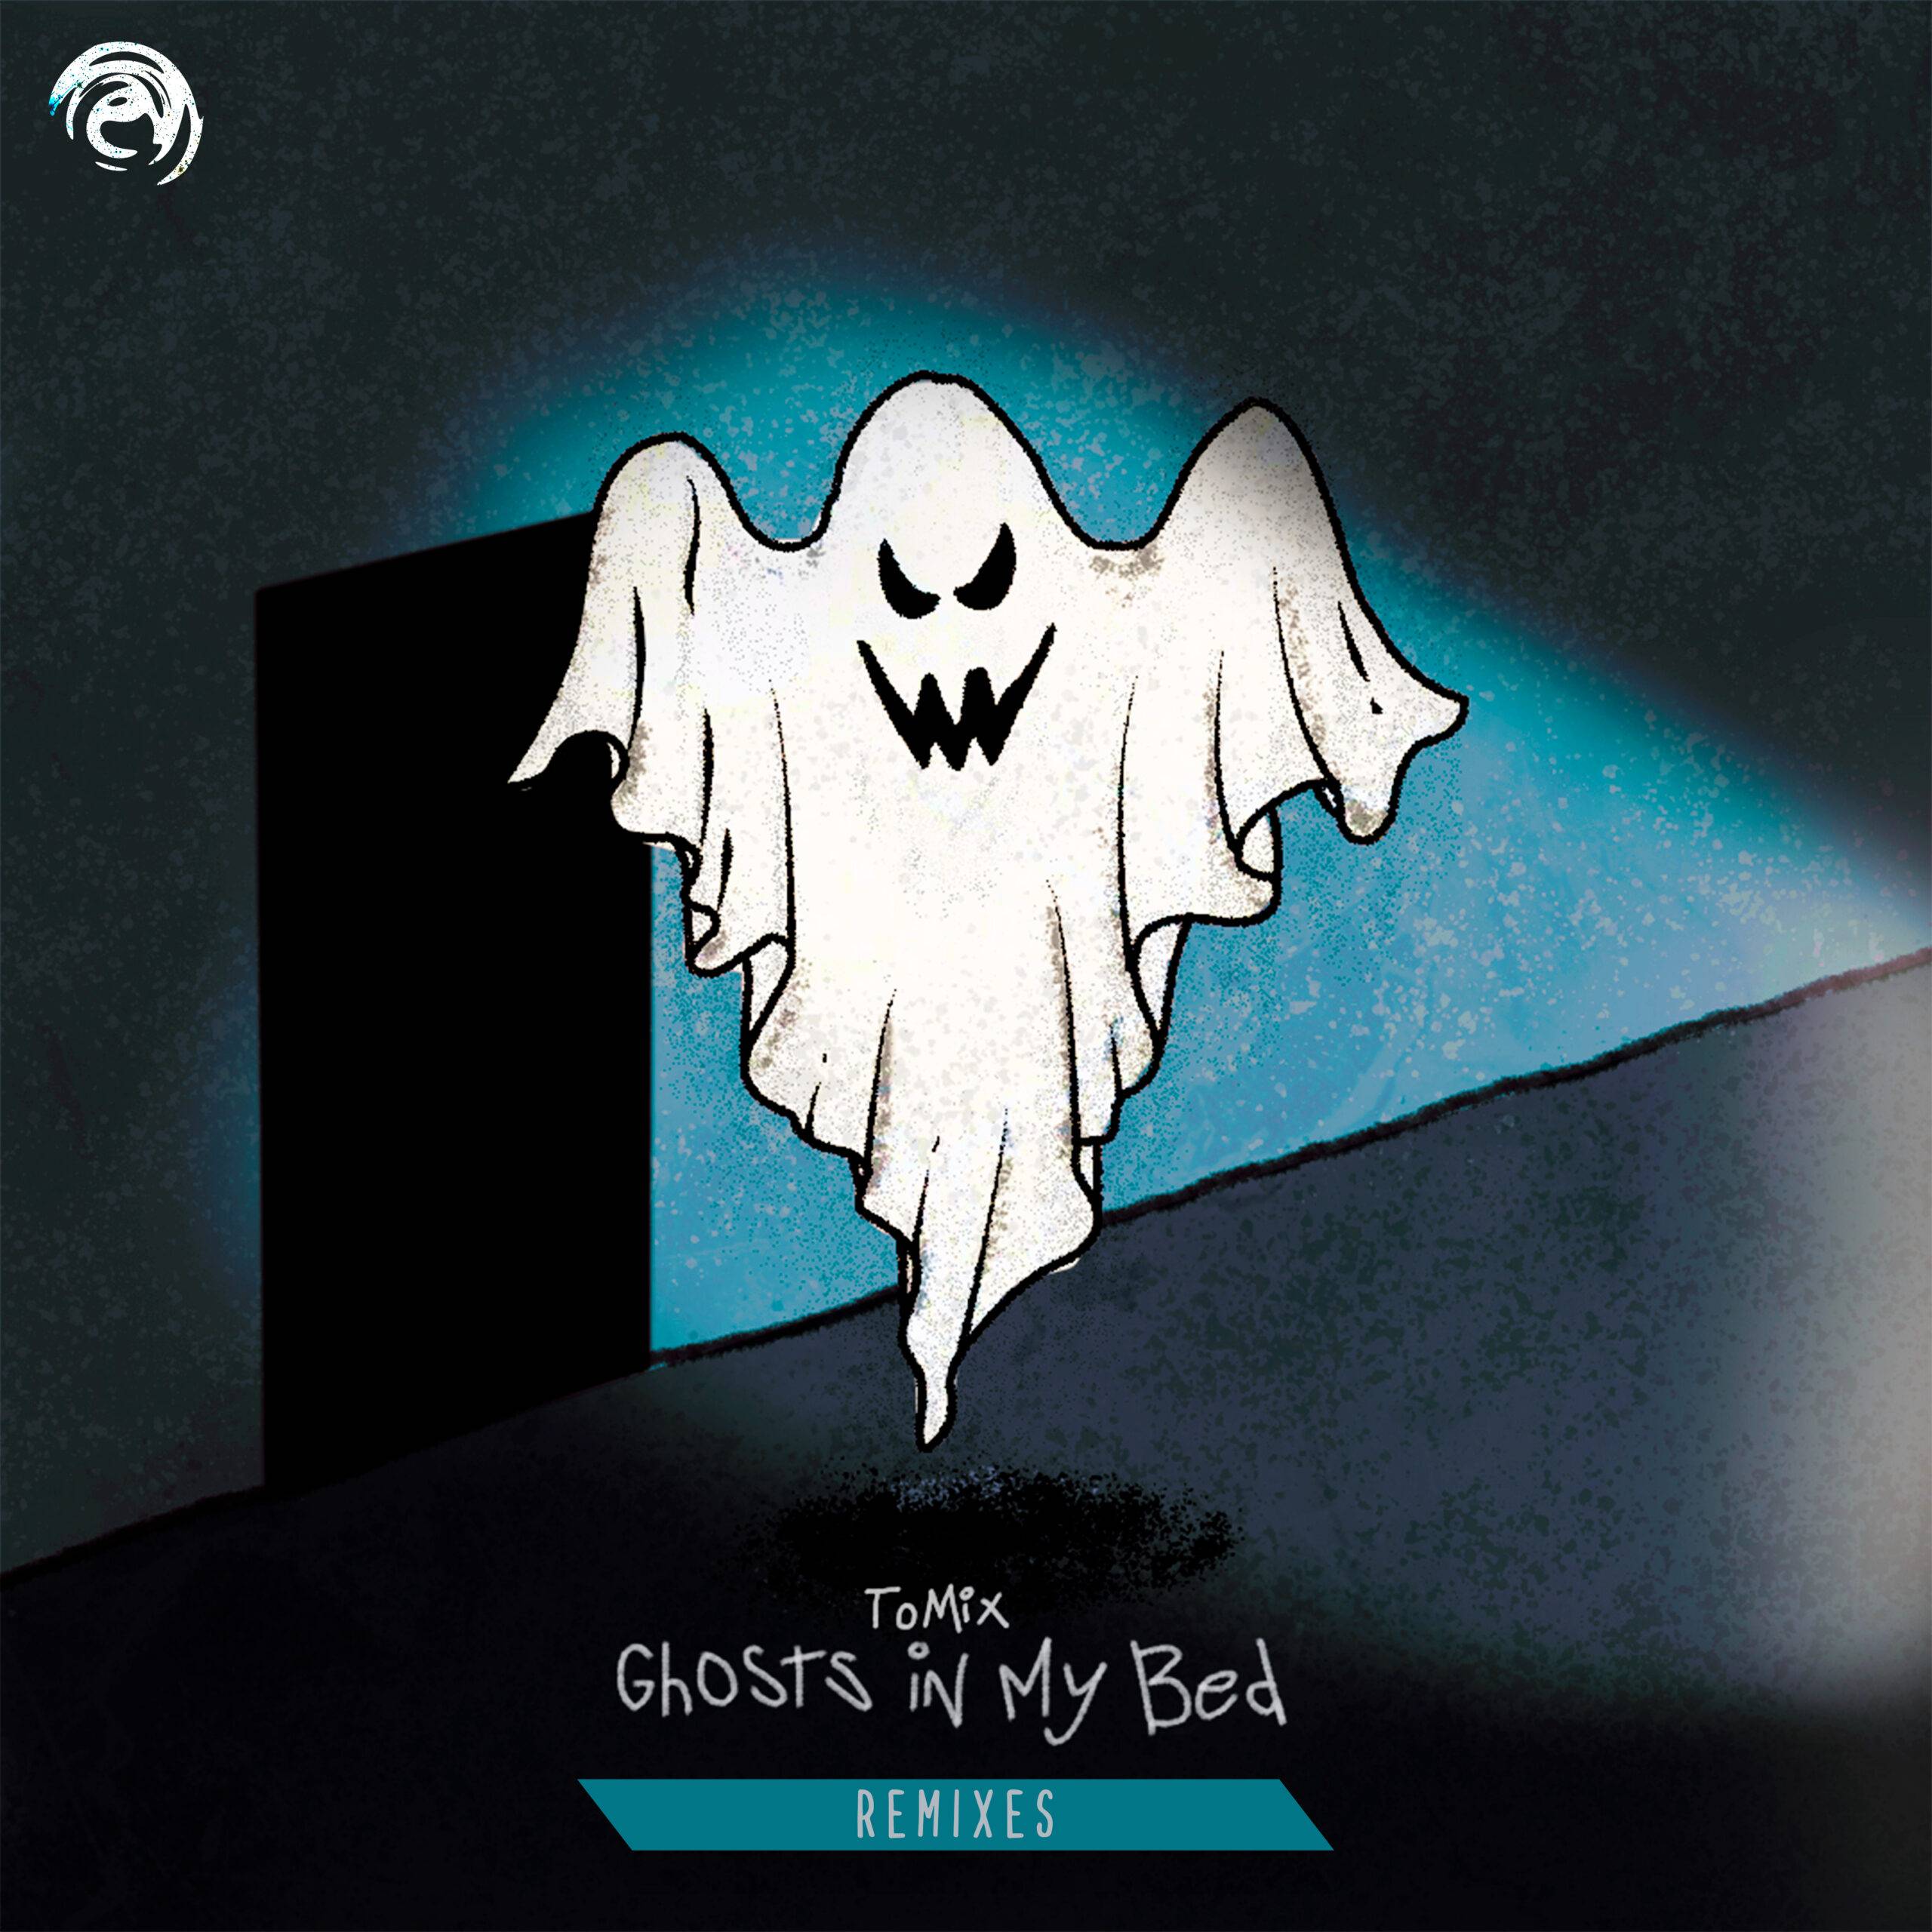 Artwork for 'Ghosts In My Bed - The Remixes' by ToMix. features a ghost inside a blue house, outside of an empty bedroom.